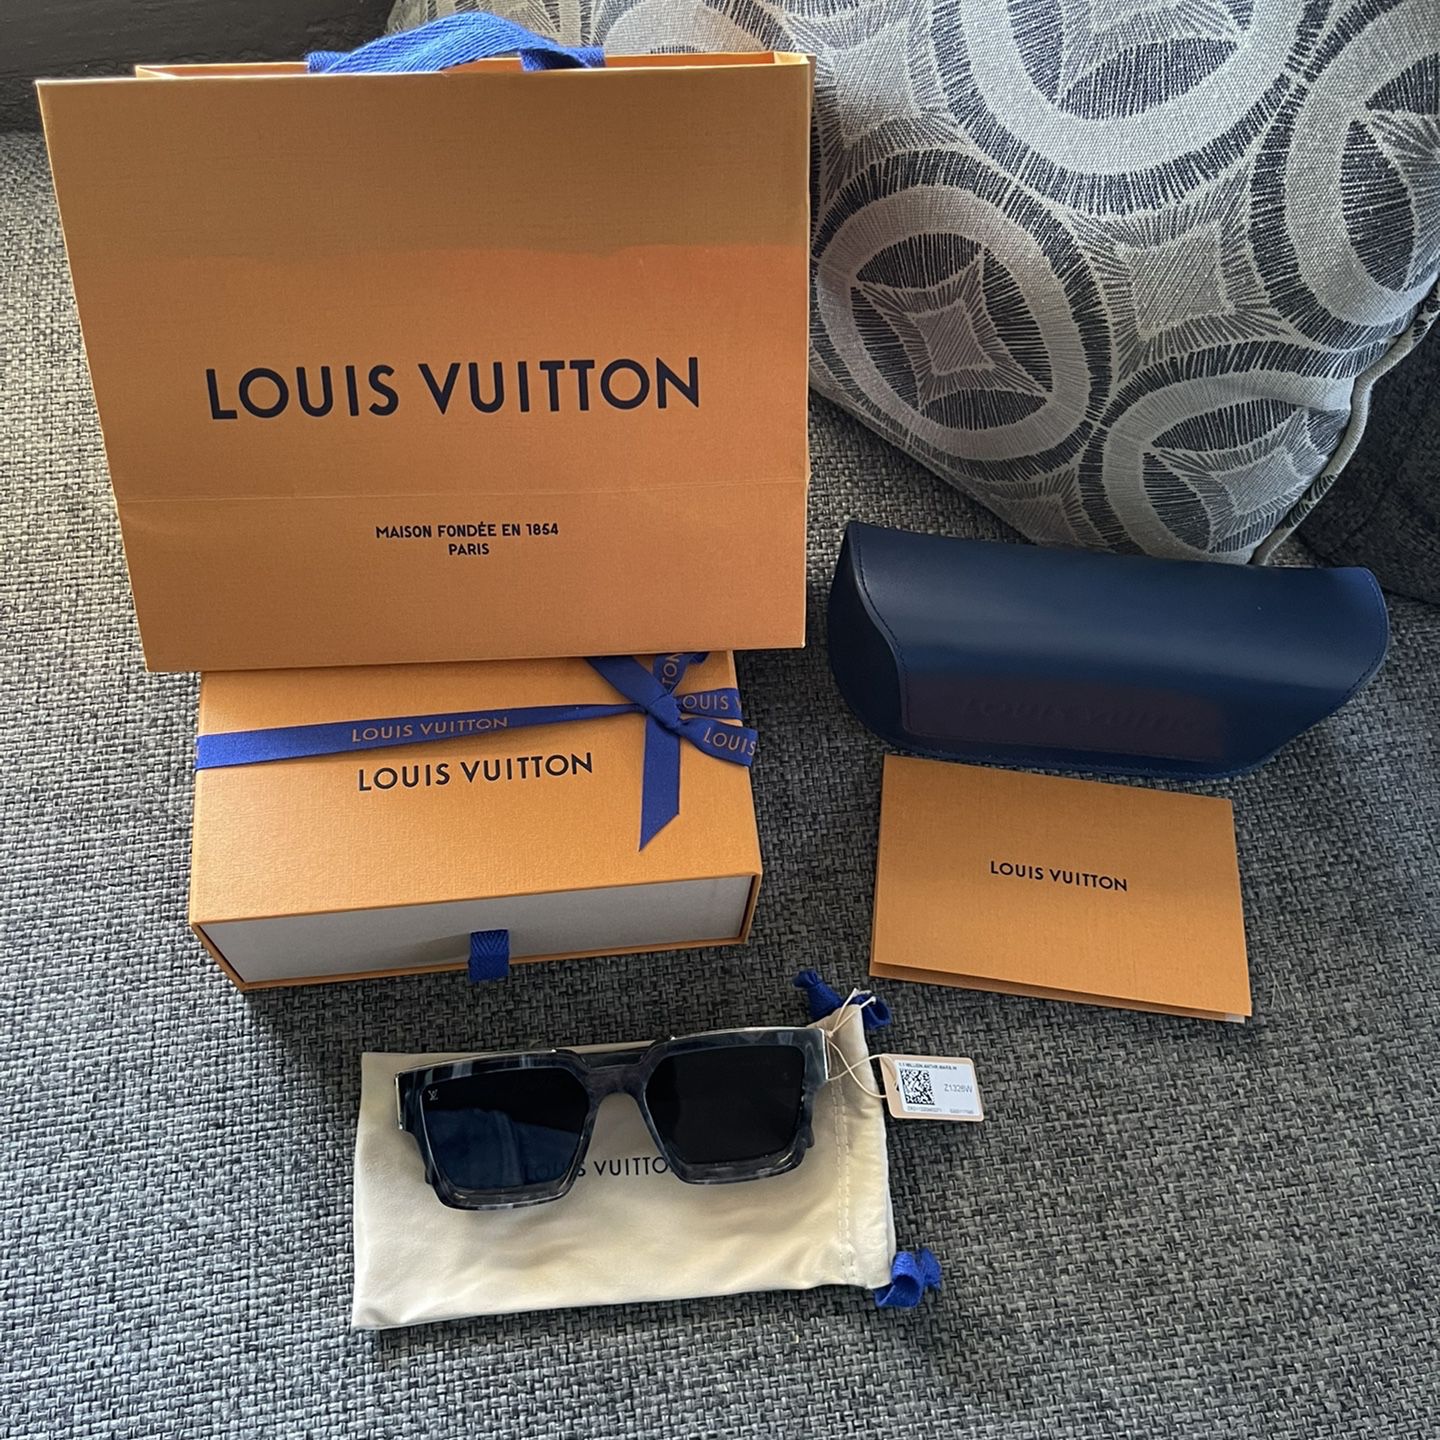 Louis Vuitton - Authenticated Millionaire Sunglasses - Plastic Green For Man, Very Good condition